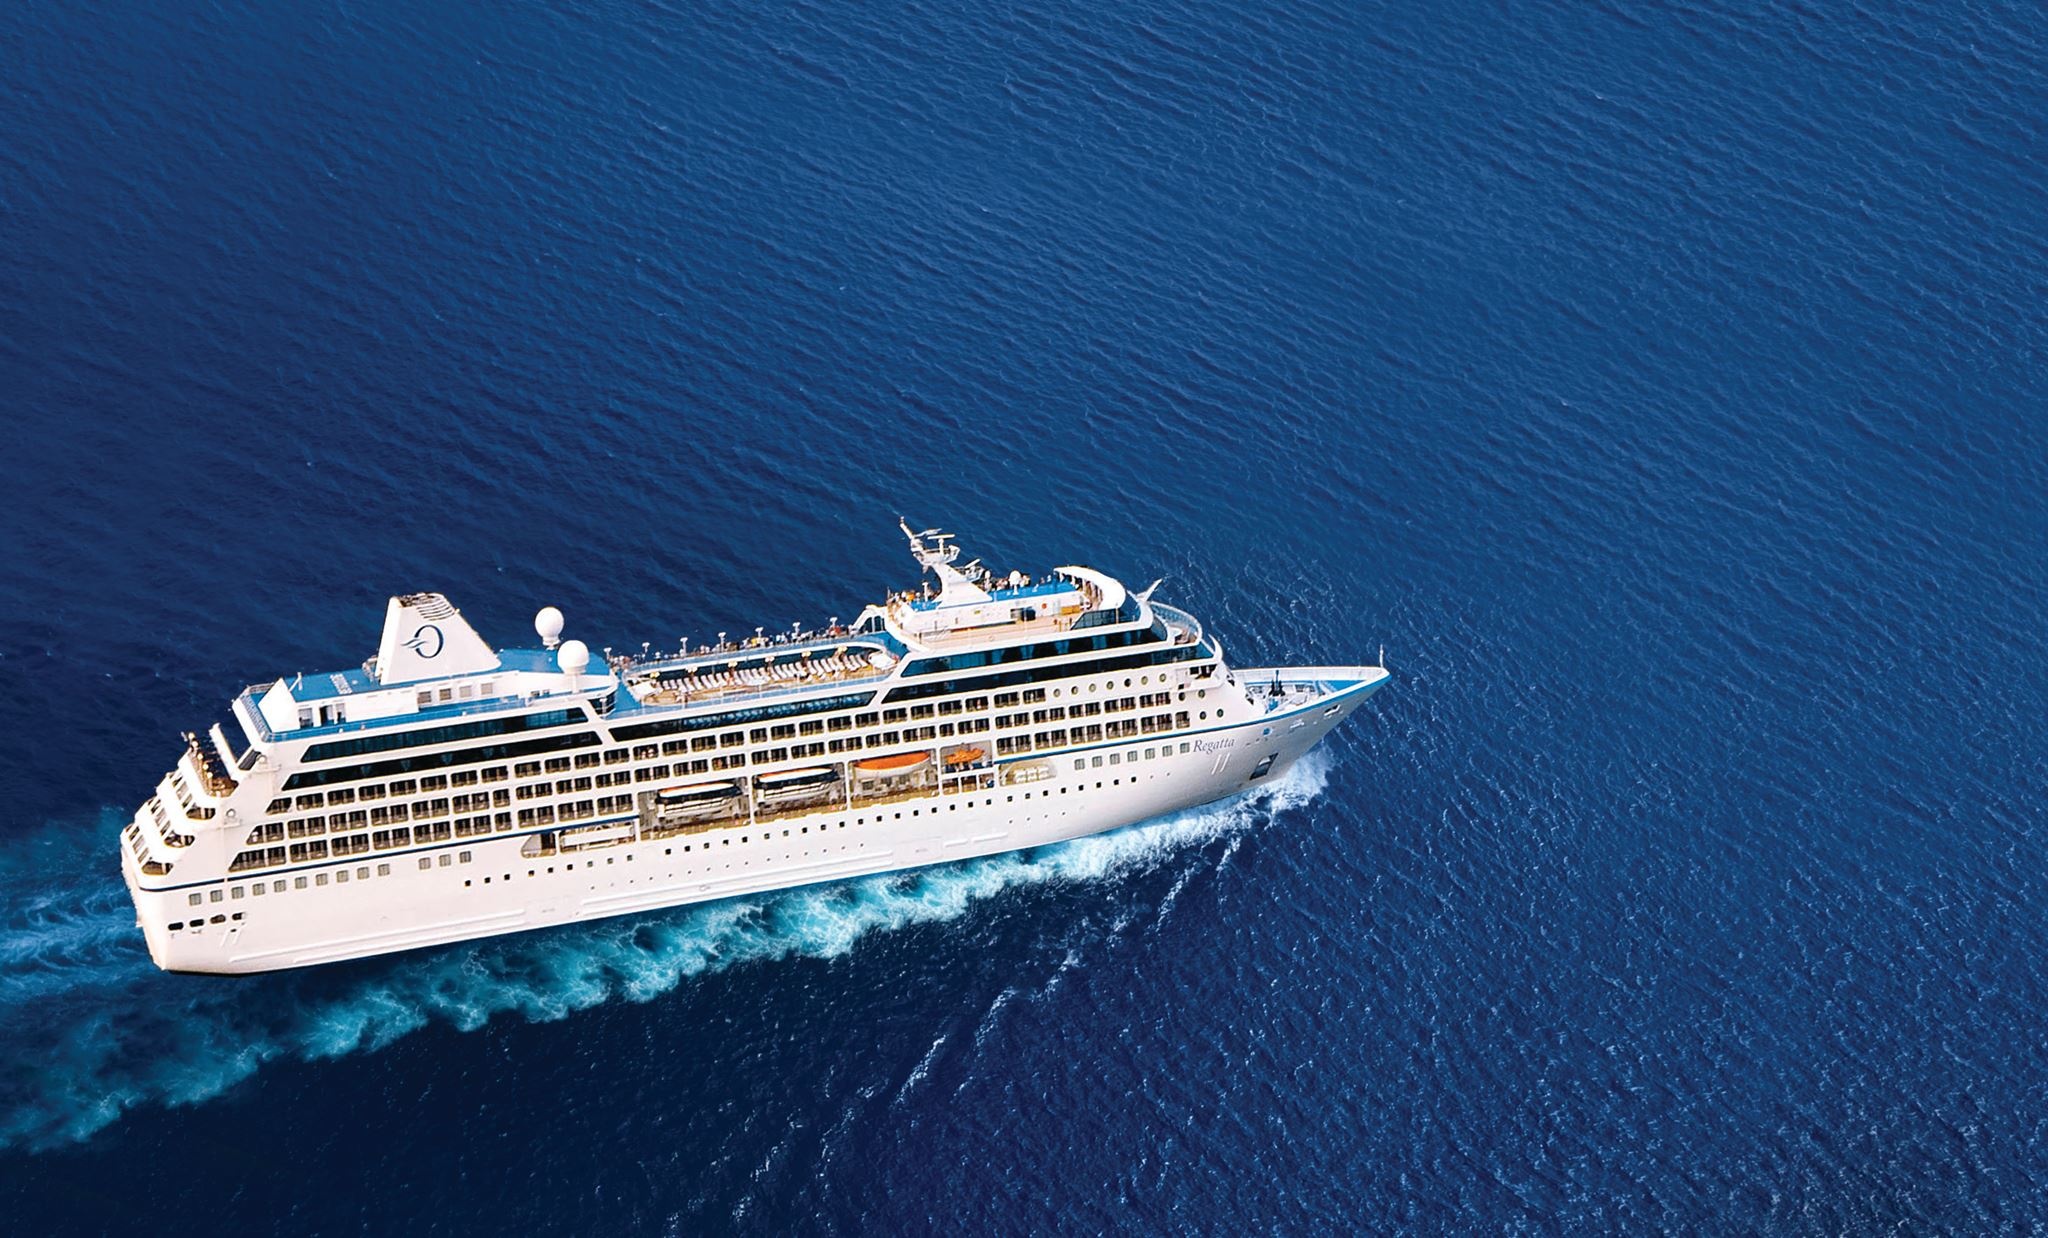 Cruiser (Ship): Oceania cruise, Visiting a number of fabulous destinations. 2050x1240 HD Wallpaper.